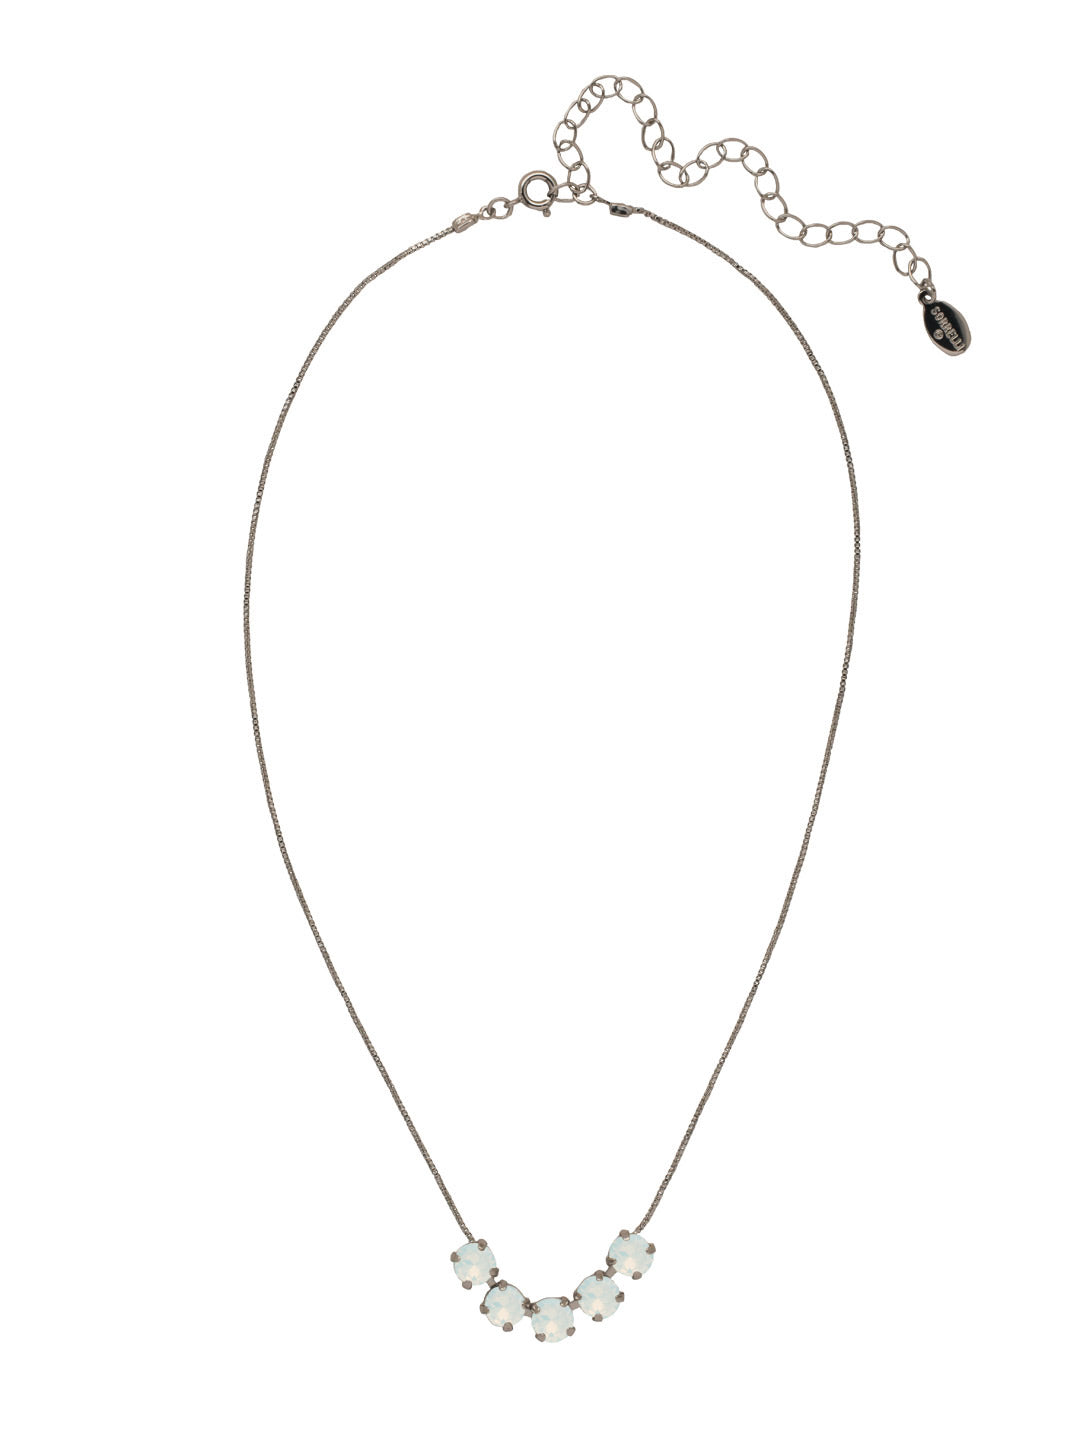 Shaughna Tennis Necklace - NFC84ASWO - <p>The Shaughna Tennis Necklace features five crystals on a delicate adjustable chain. From Sorrelli's White Opal collection in our Antique Silver-tone finish.</p>